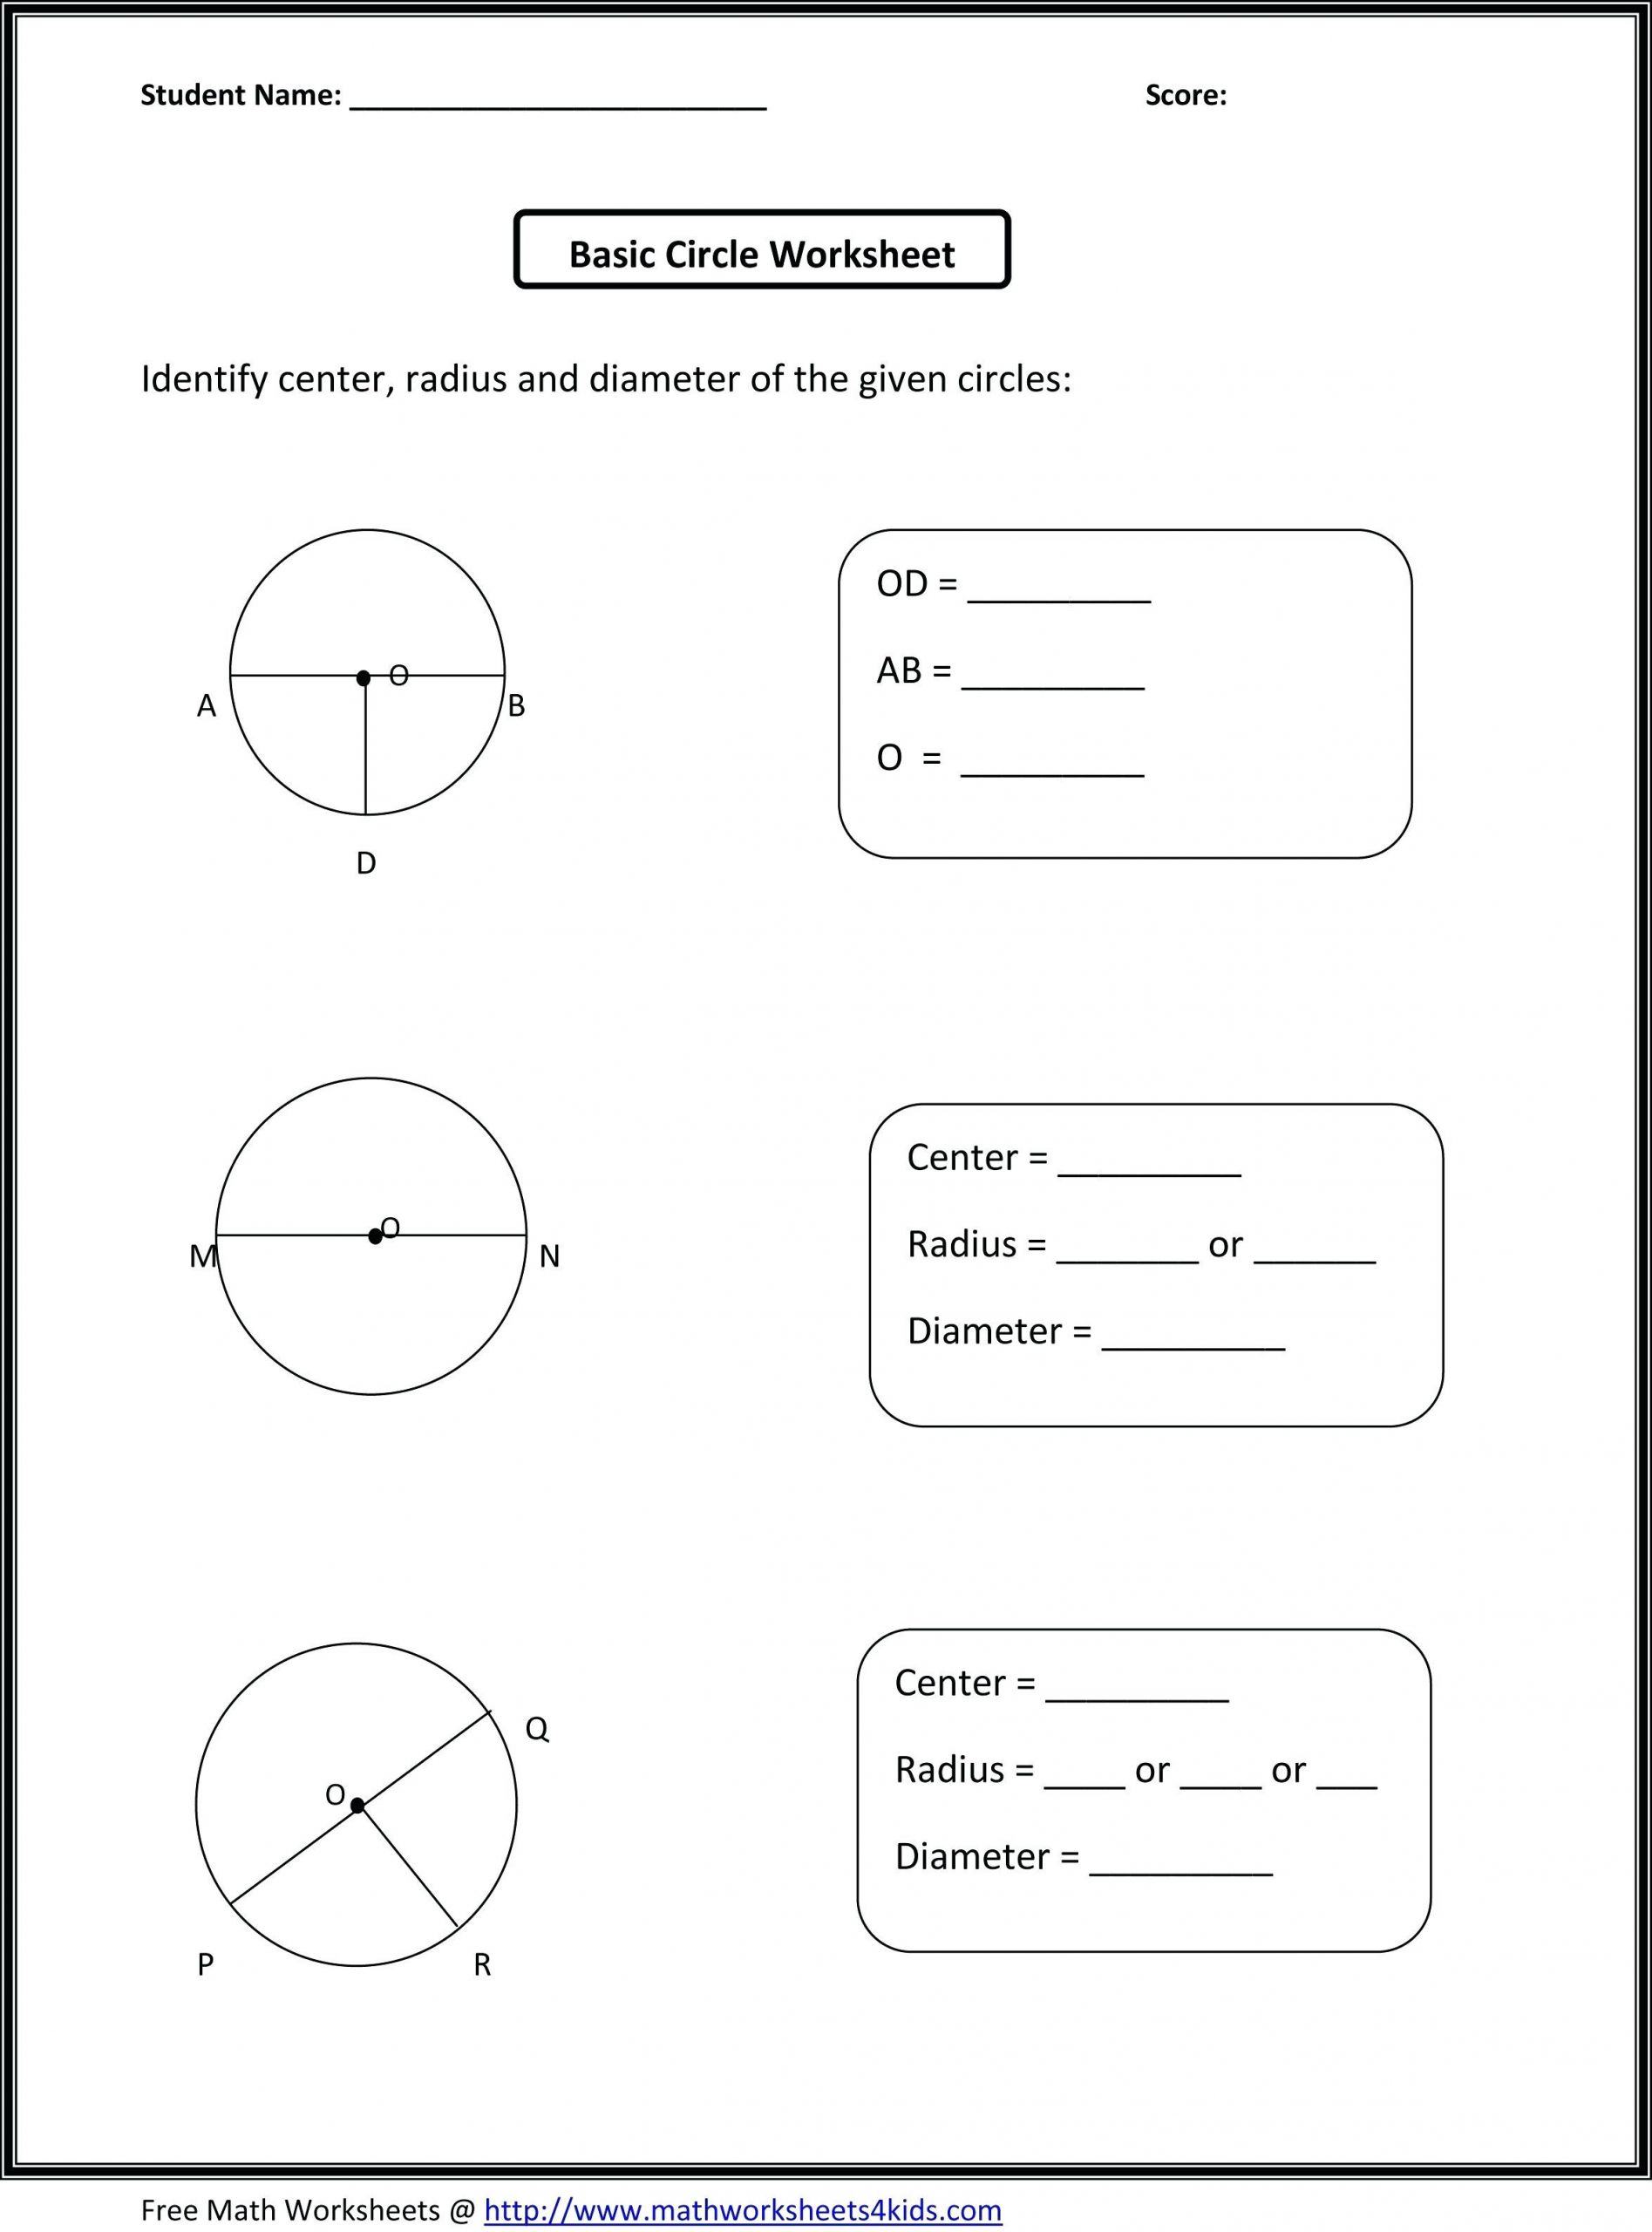 Free Math Worksheets First Grade 1 Subtraction Add and Subtract 4 Single Digit Numbers